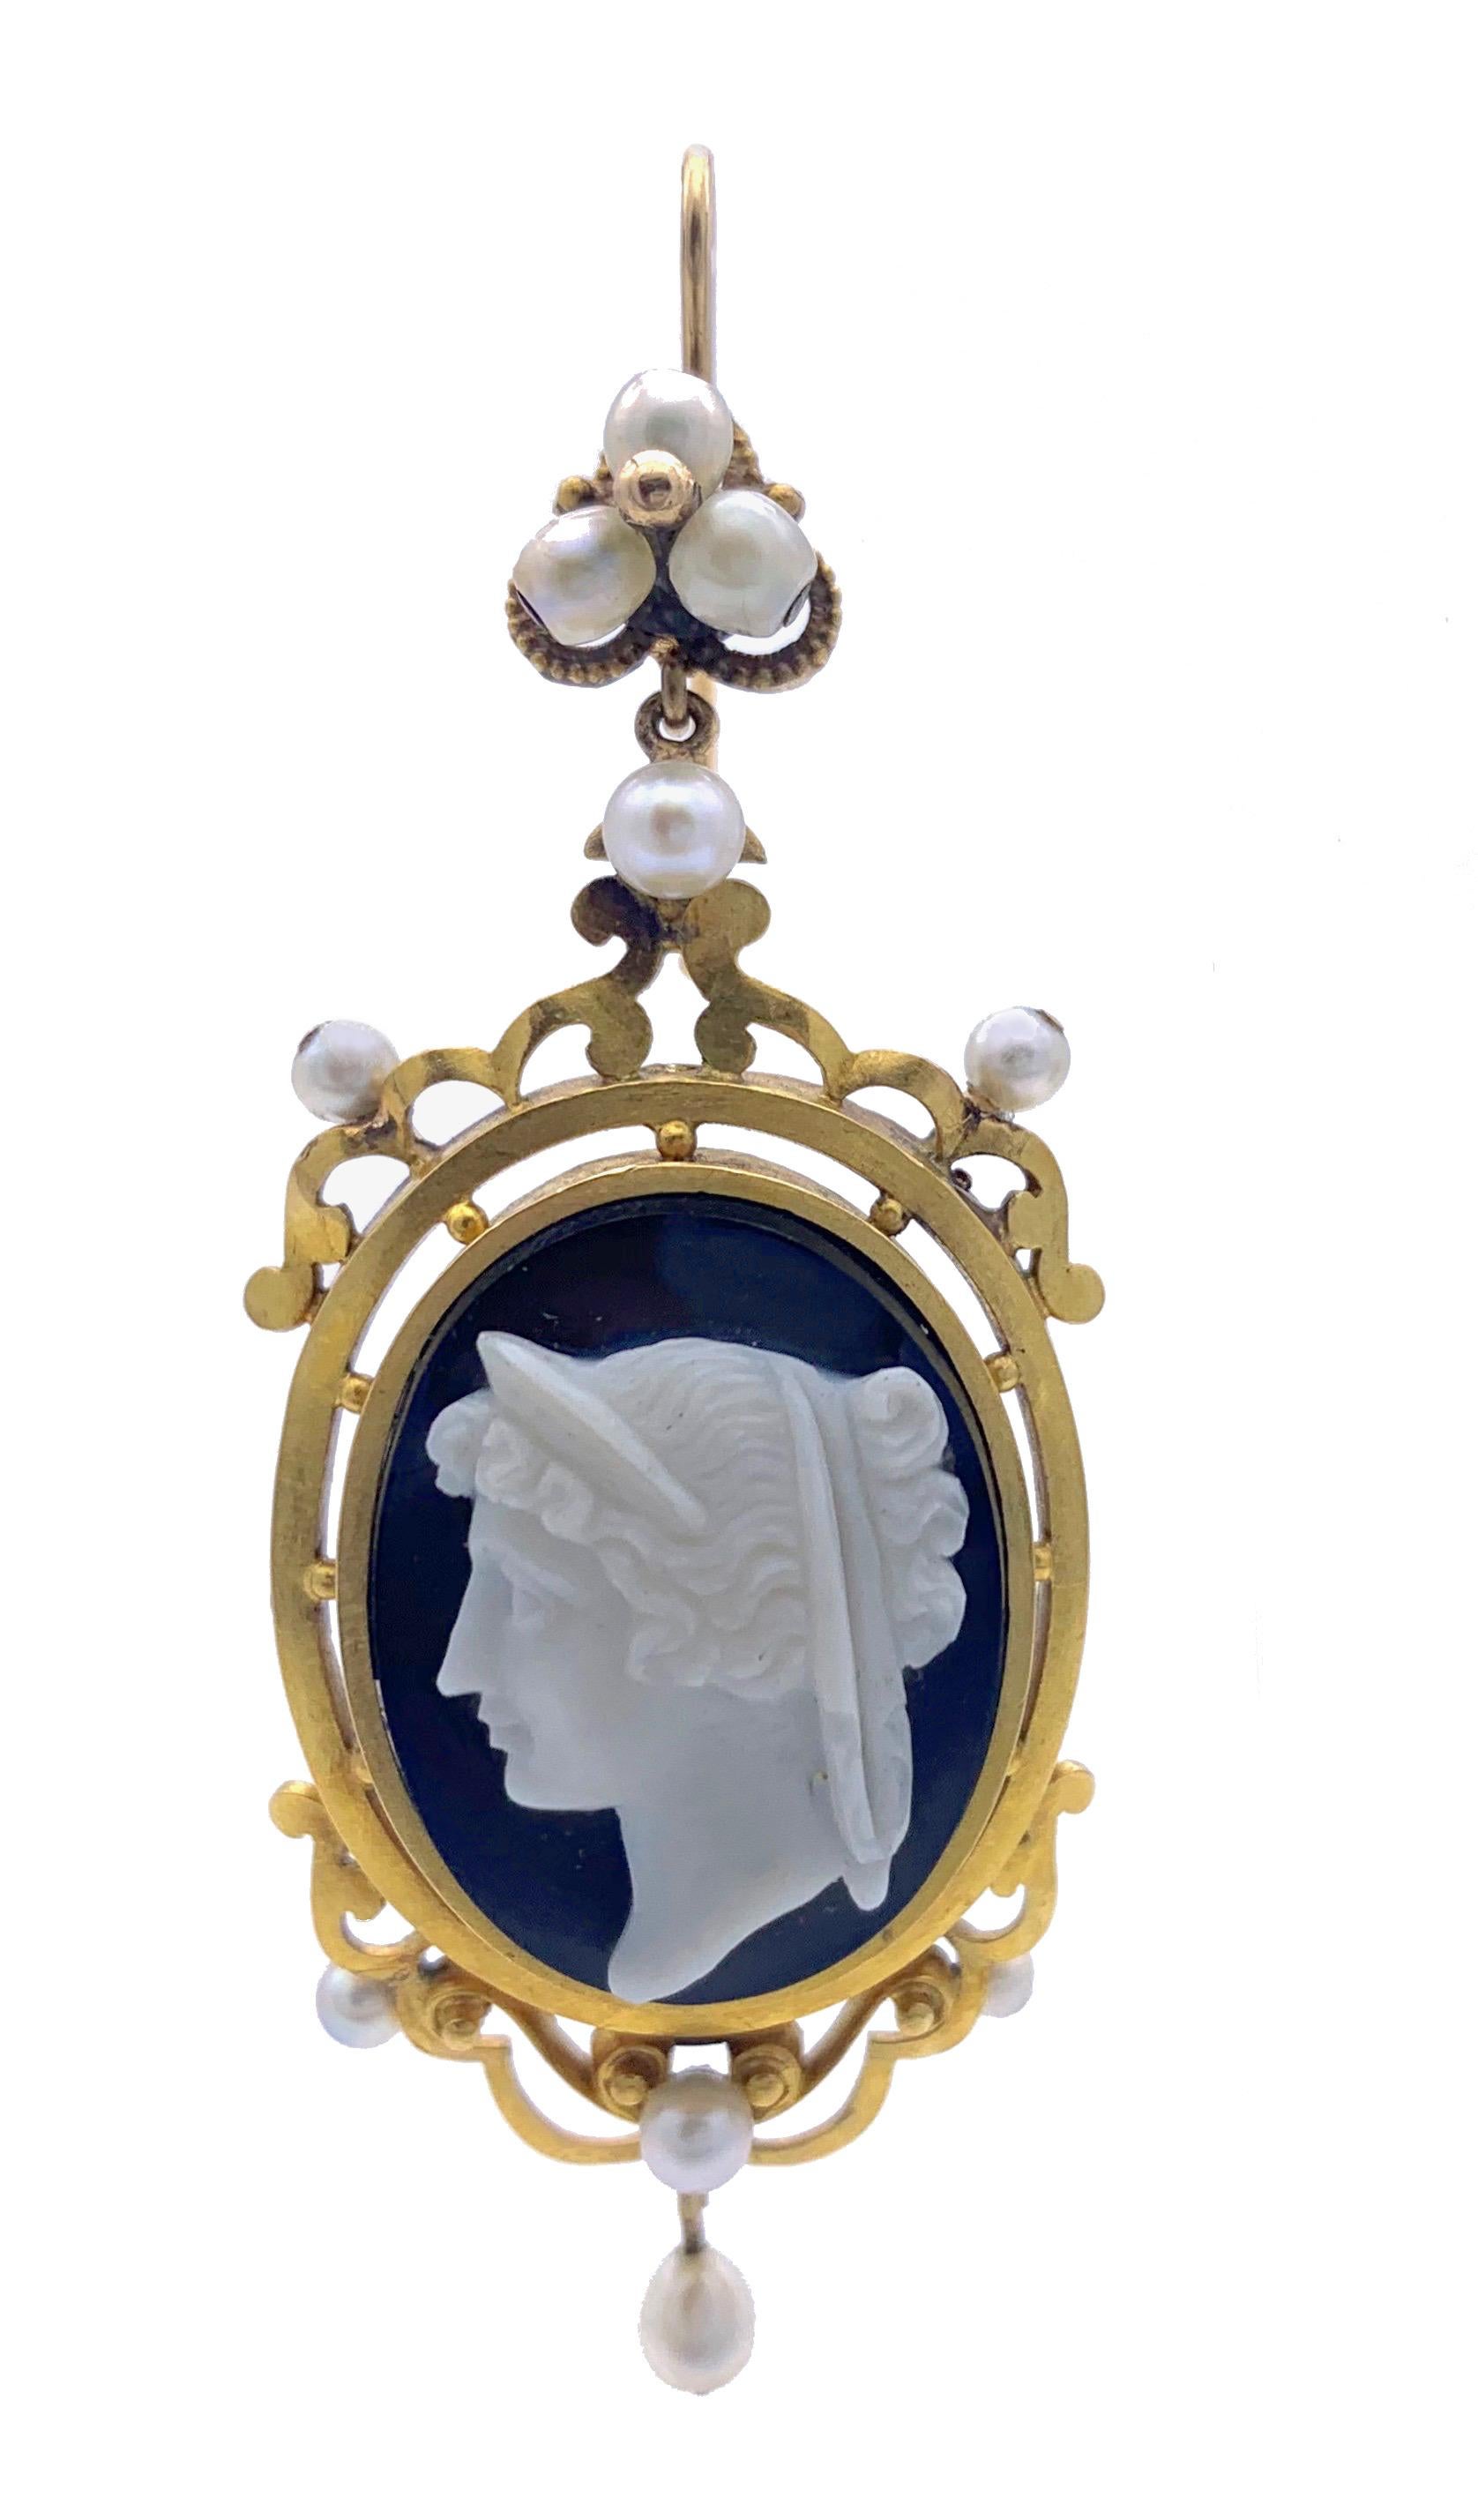 This very elegant and stylish pair of dangling cameo earrings feature portrait busts of elegant ladies in classical ancient hair and headdress carved in 1860 ca. out of black and white layered agate. The 18 carat gold settings are embellished with